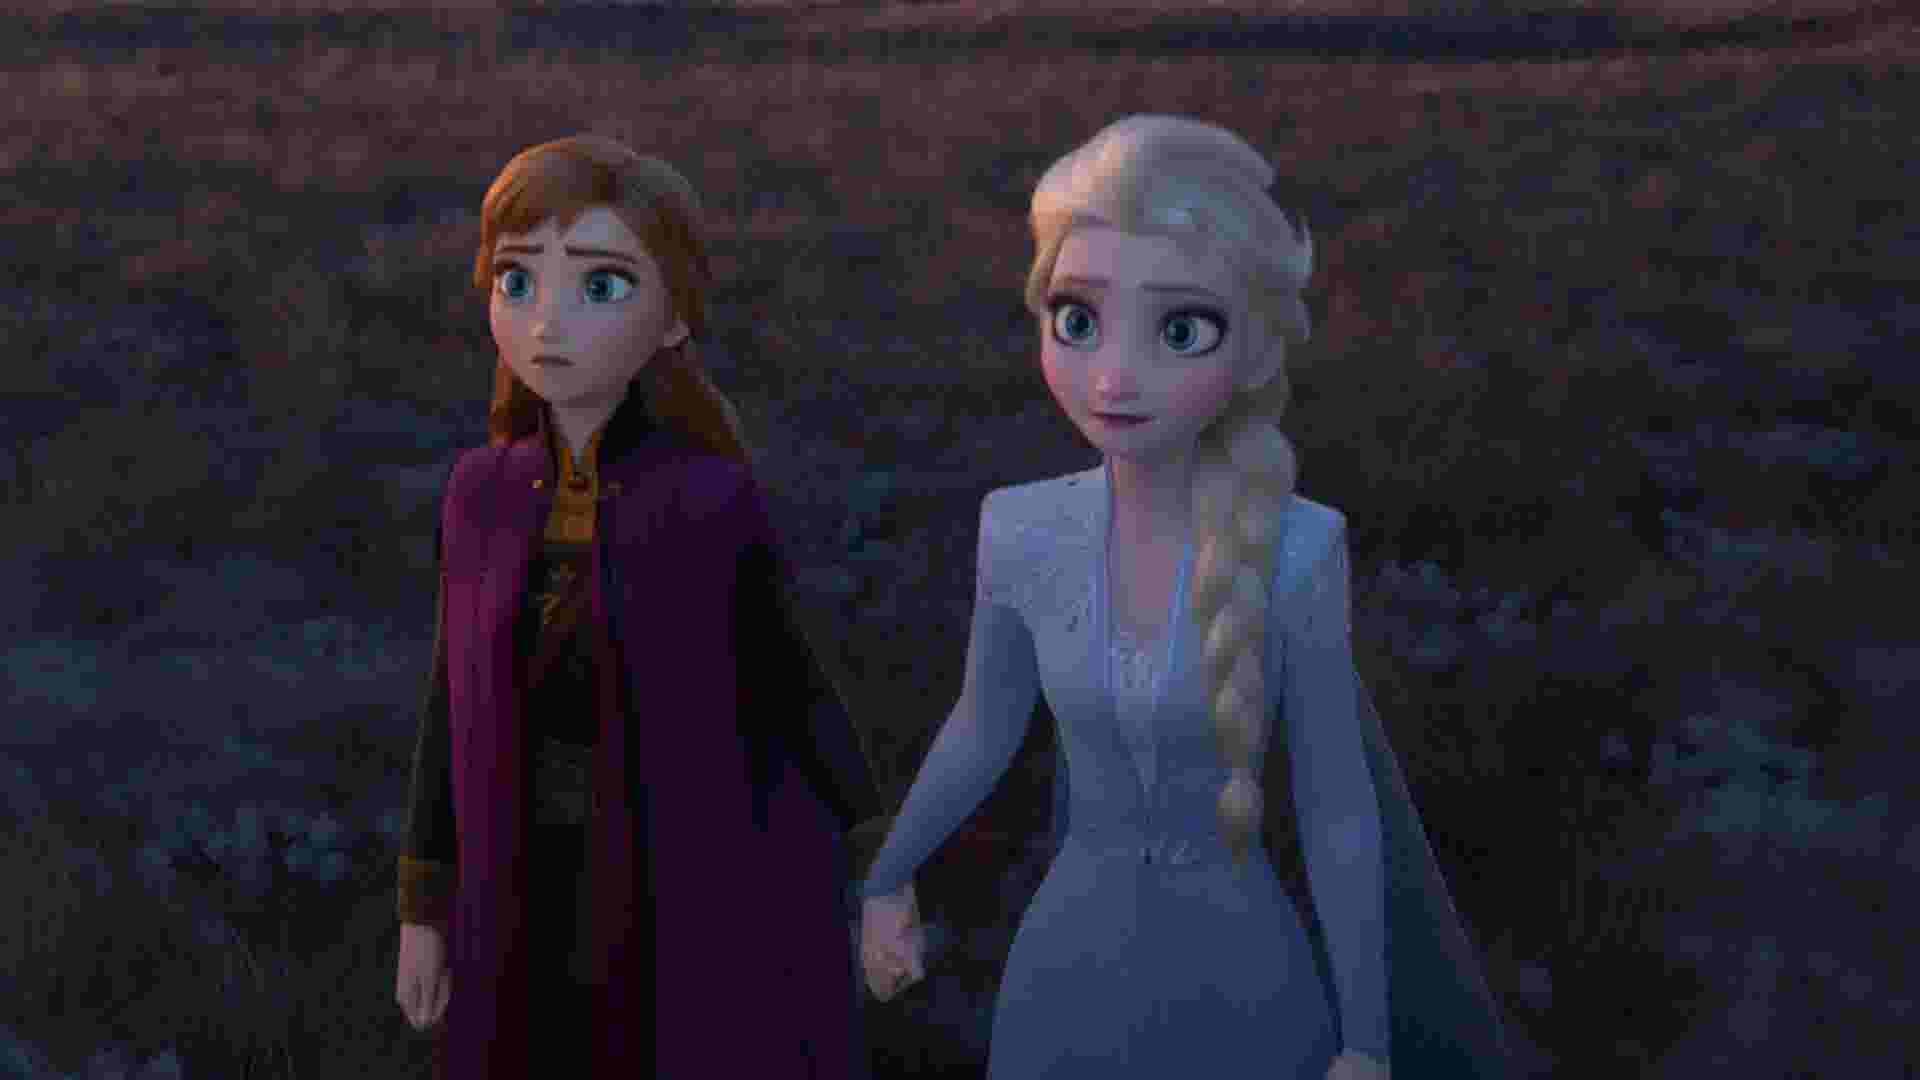 Elsa, Anna face the unknown in new 'Frozen II' trailer